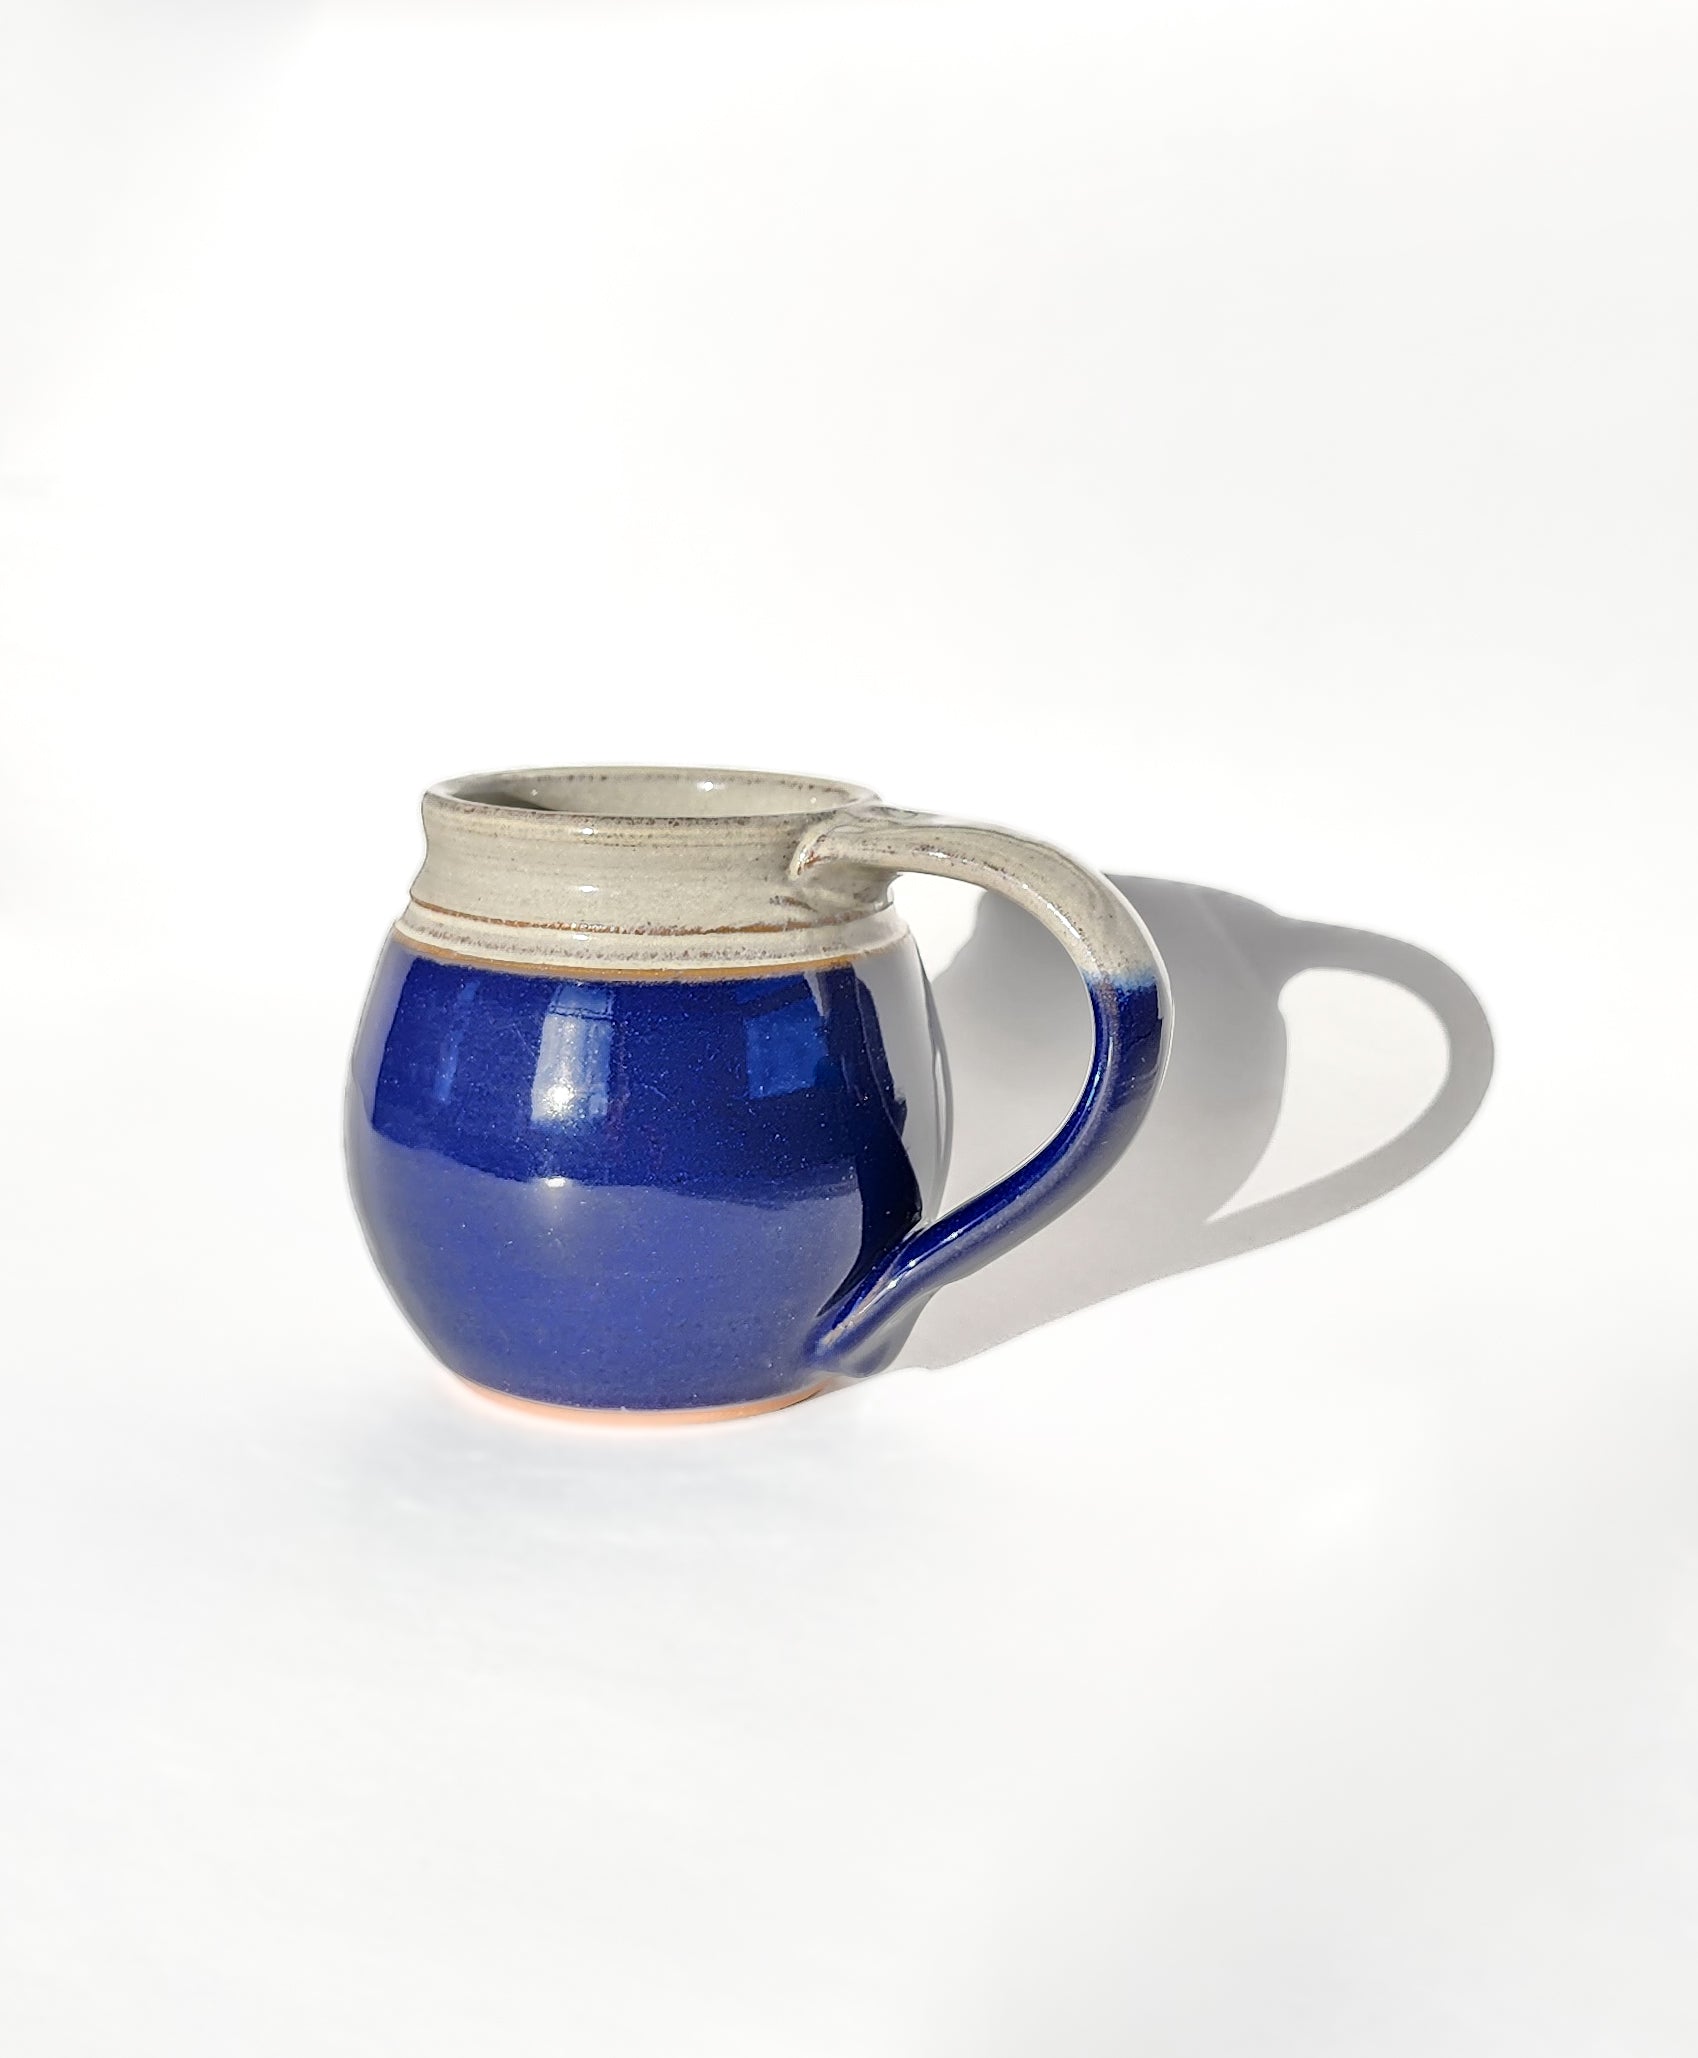  Image: Clinton Pottery's Handmade Medium Mug in Cobalt Blue – A bold and versatile 14-16 oz mug, expertly crafted. This Cobalt Blue piece adds a splash of vibrant elegance to your daily beverage routine, reminiscent of deep ocean waters and sophistication. Ideal for savoring moderate quantities of your favorite drinks, it seamlessly combines style with functionality. The rich cobalt blue hue enhances the bold appeal of this medium-sized mug.